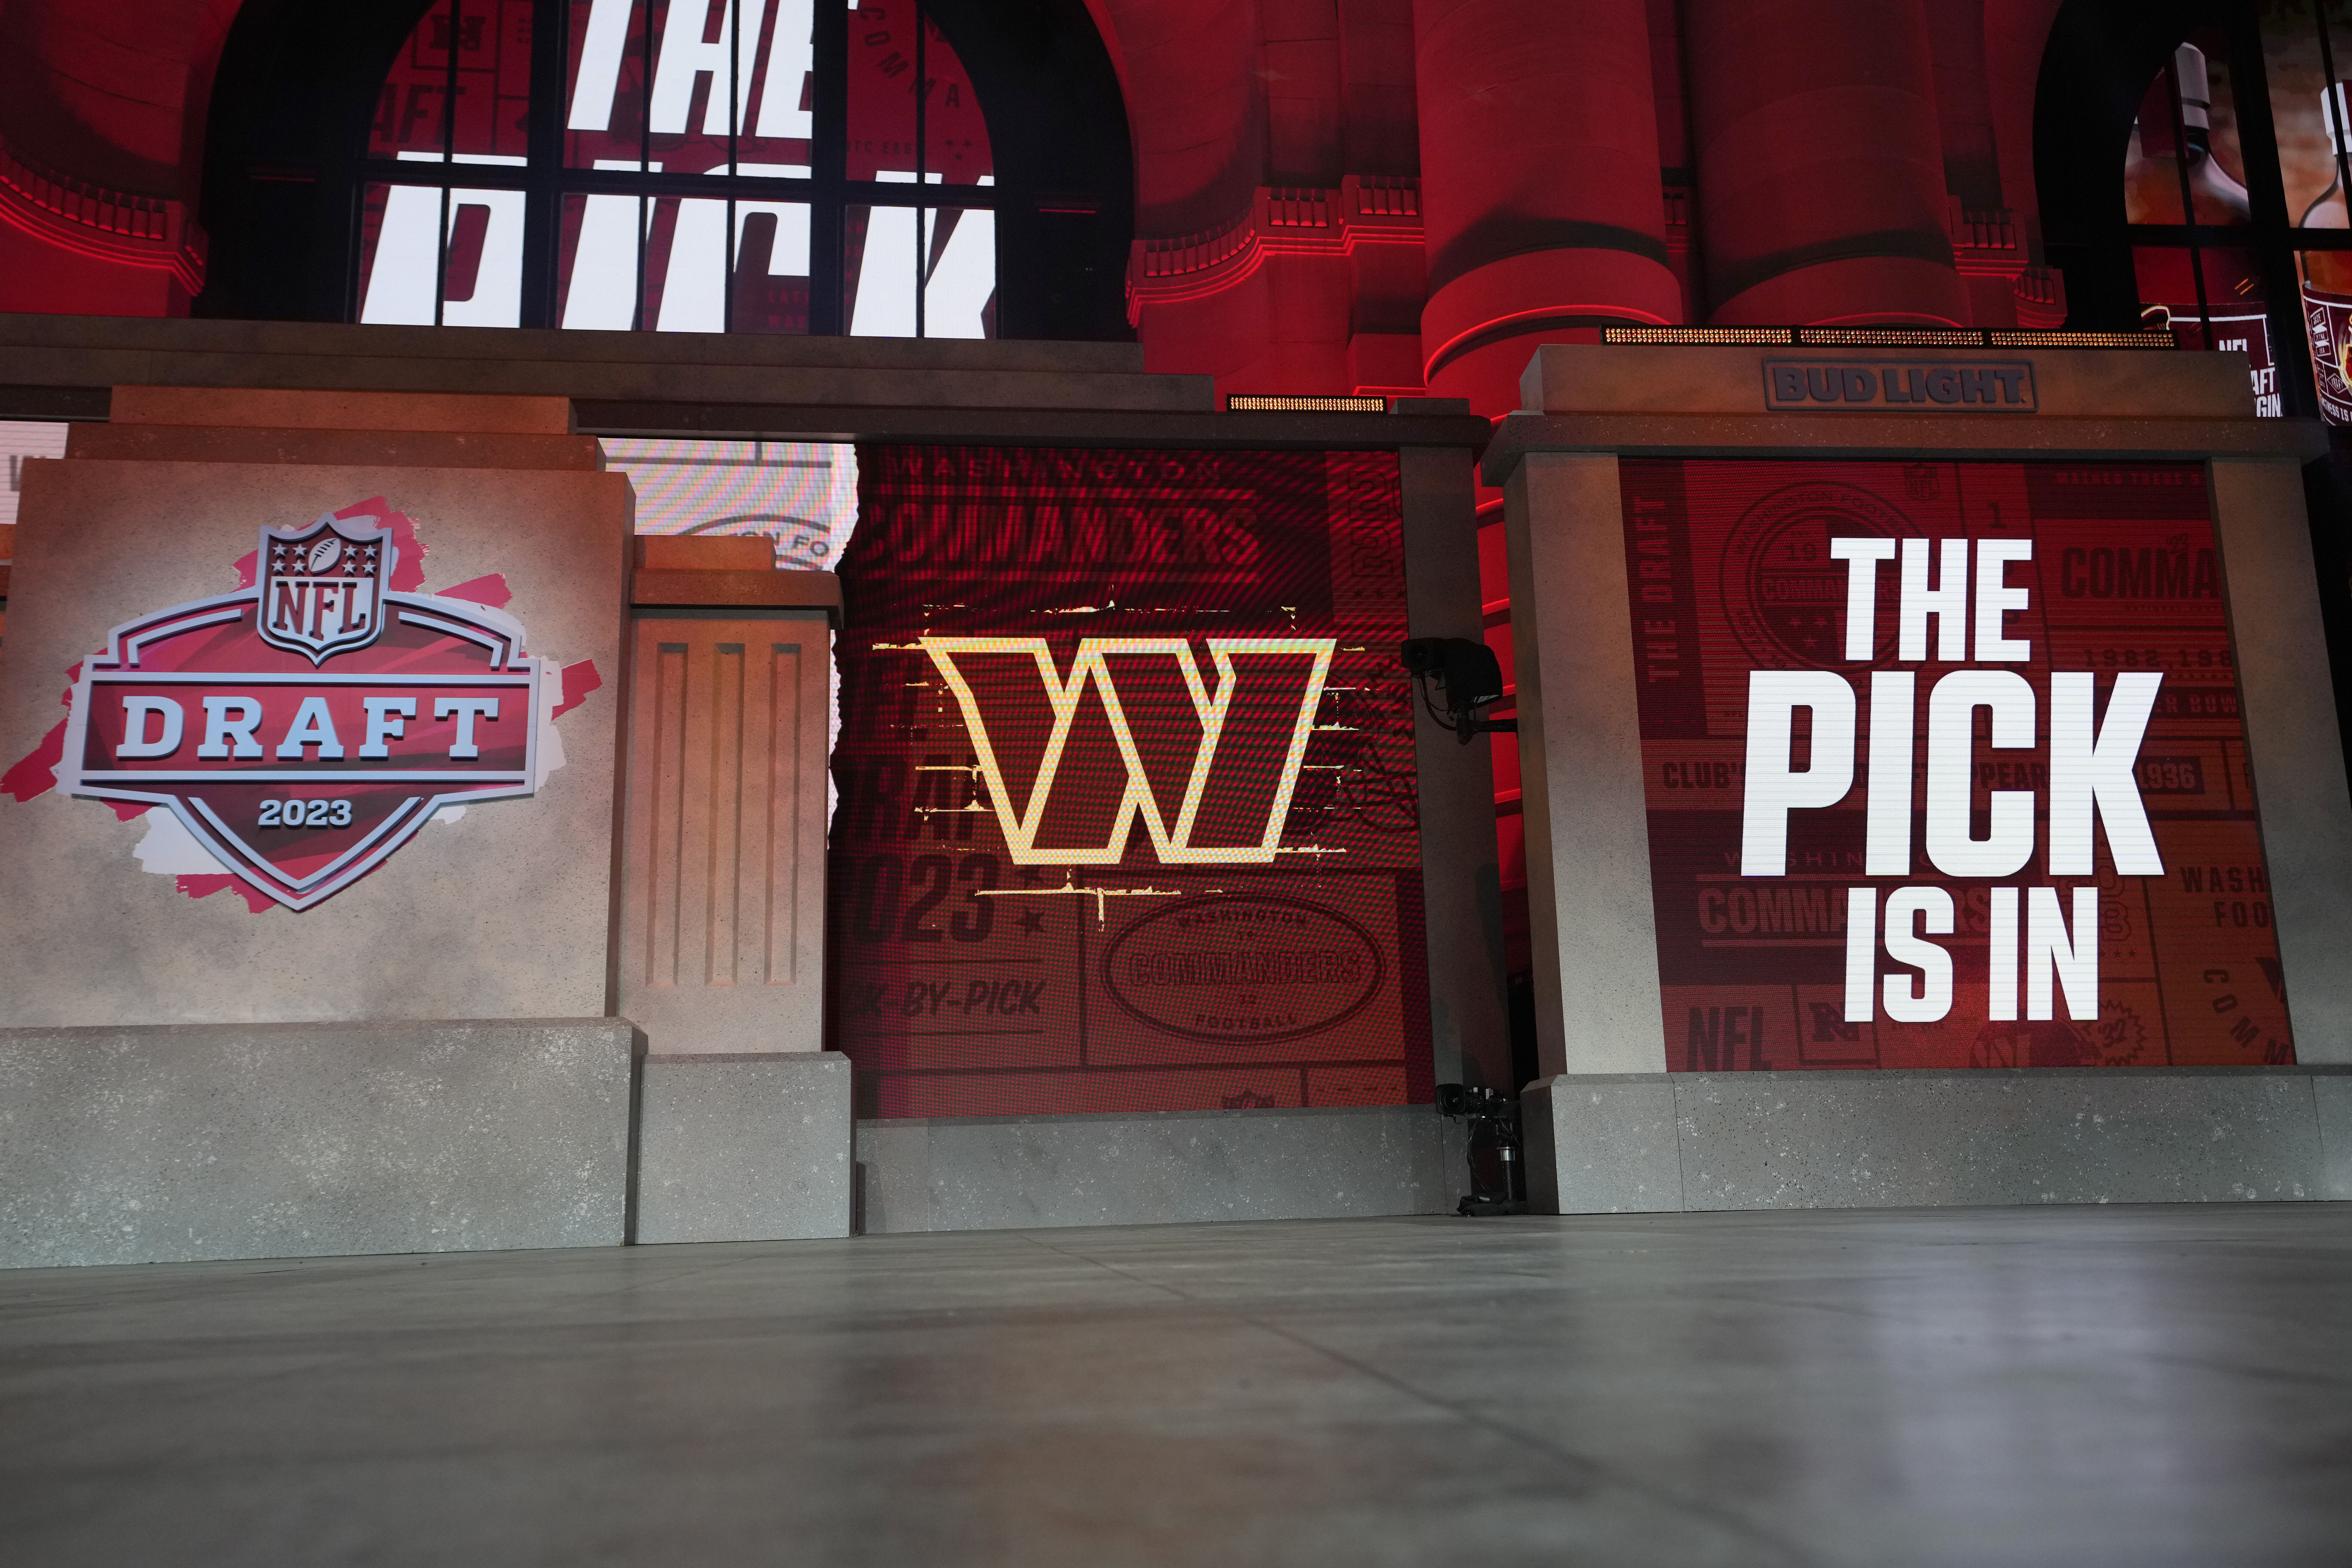 Onstage video screens display "The Pick Is In" for the Washington Commanders during the 2023 NFL Draft